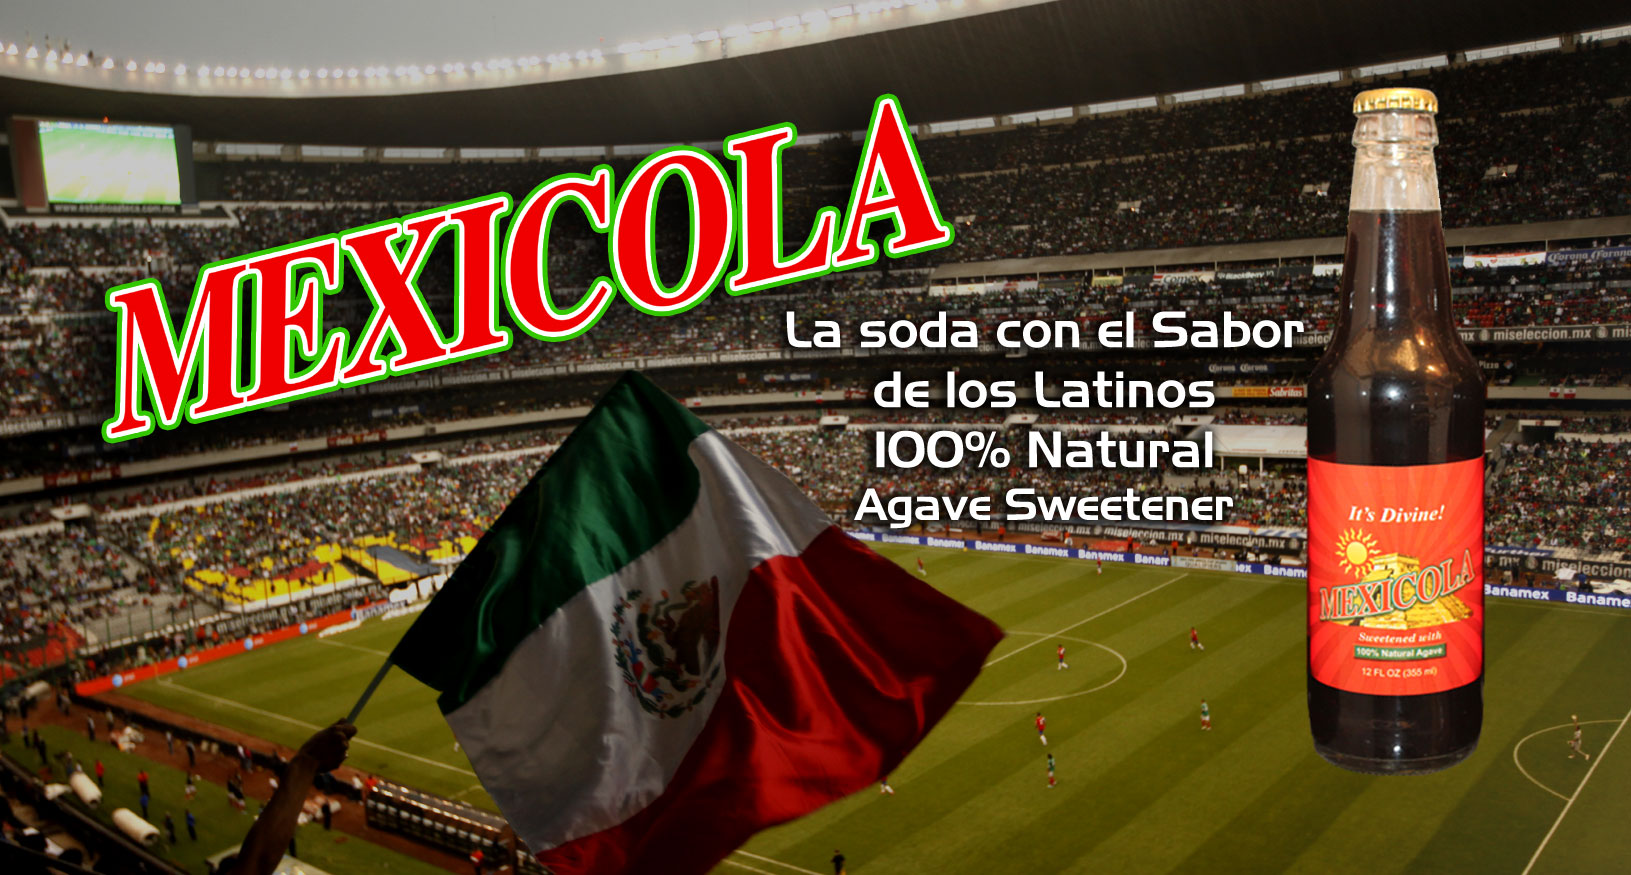 Mexi-Cola Products: Mexicola All Natural Soft Drink